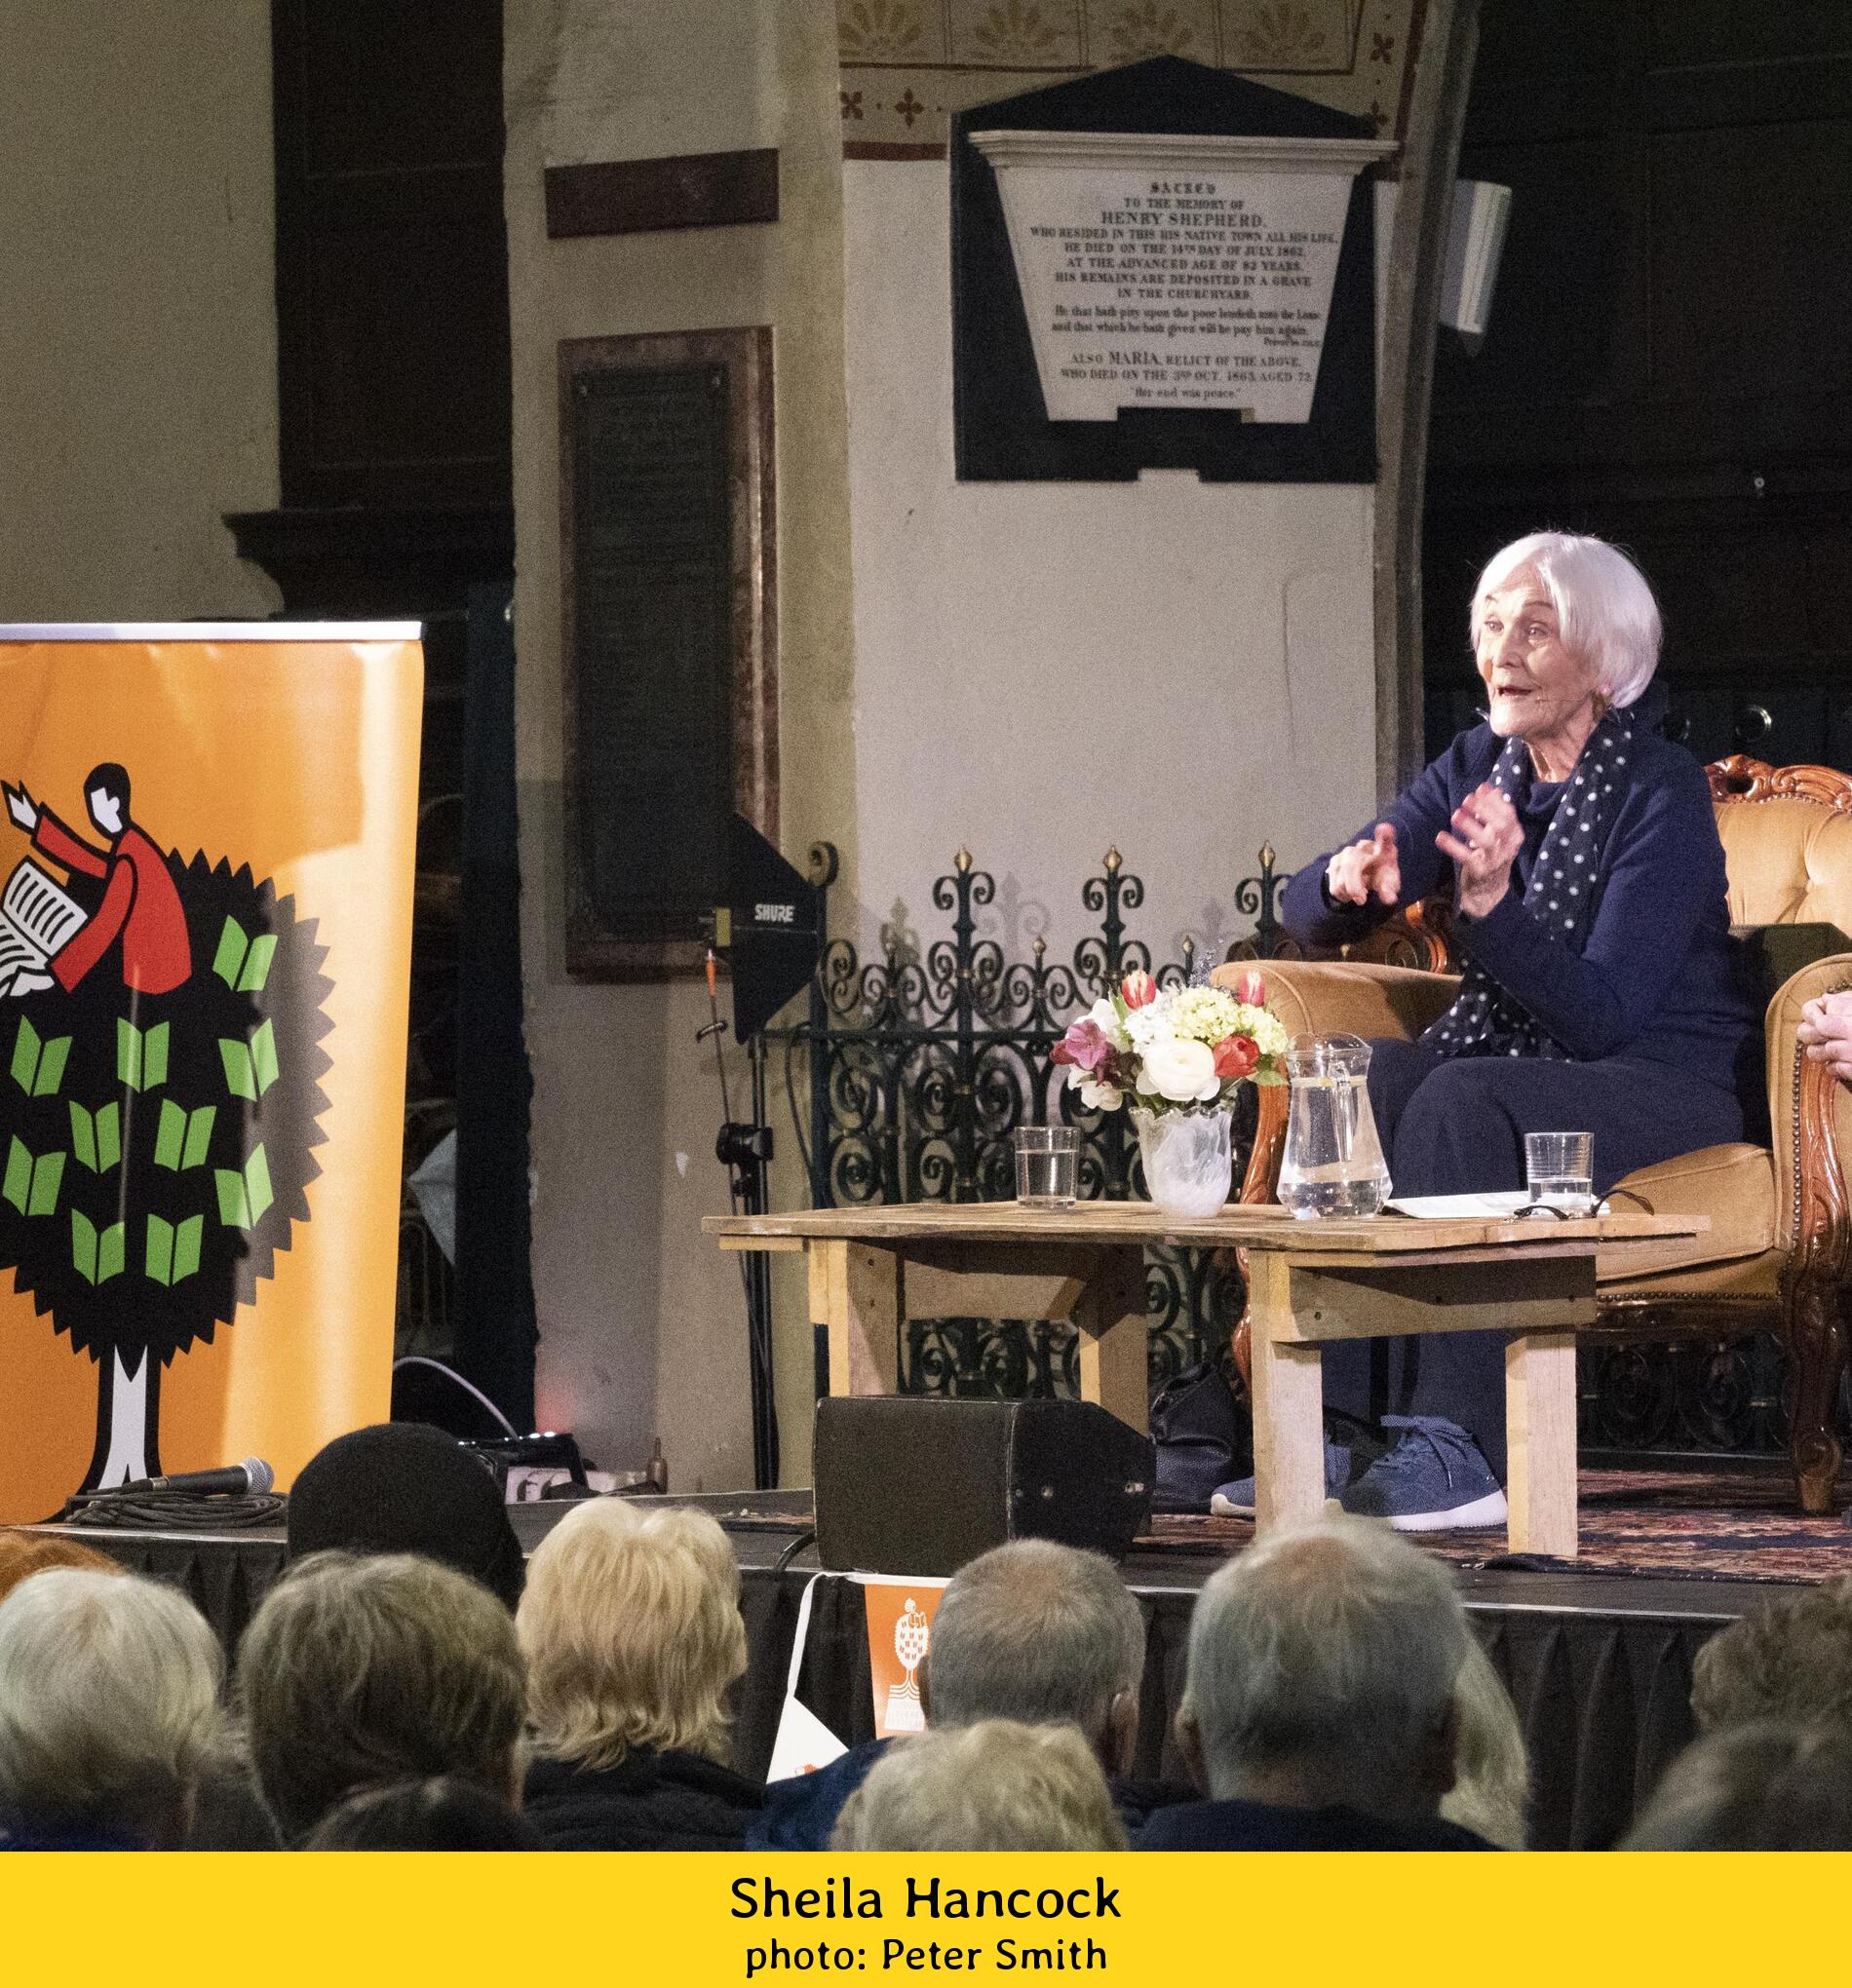 Faversham Literary Festival. Photos and images from the latest festival